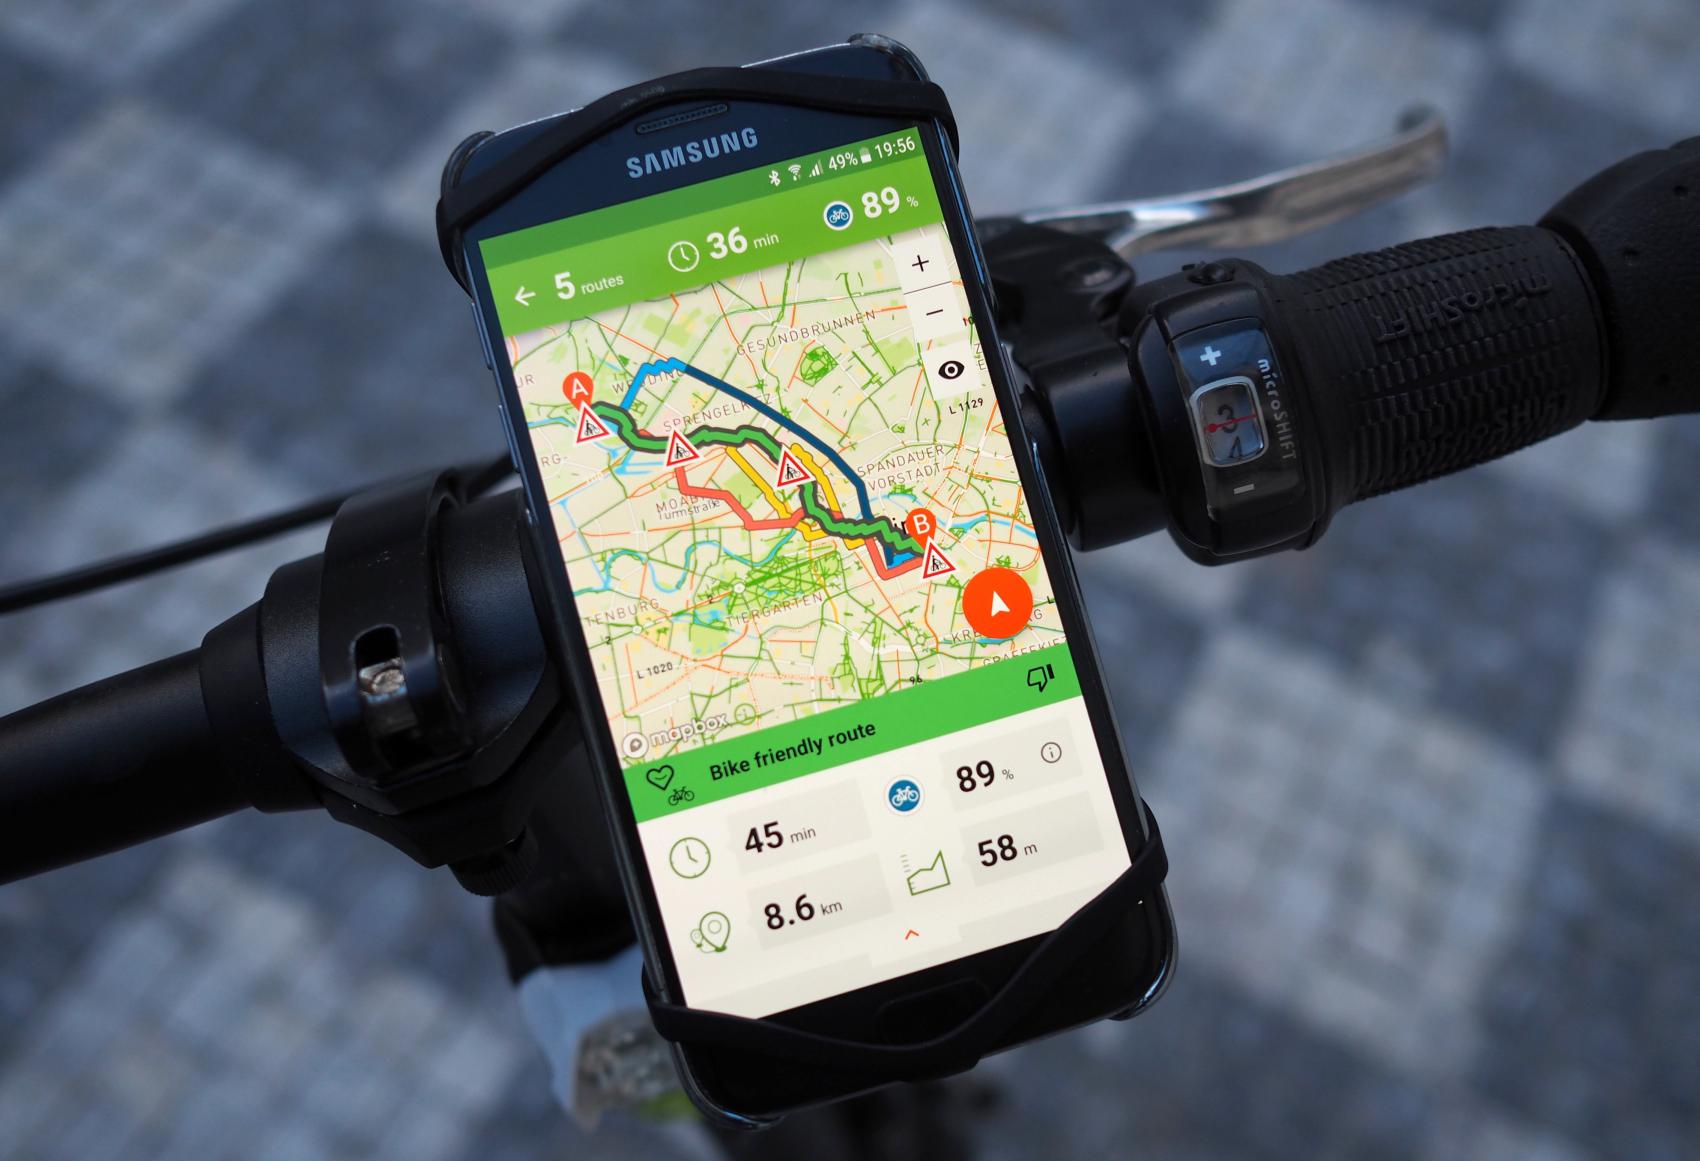 AI cycling navigation can suggest several routes optimized to cyclist individual preferences